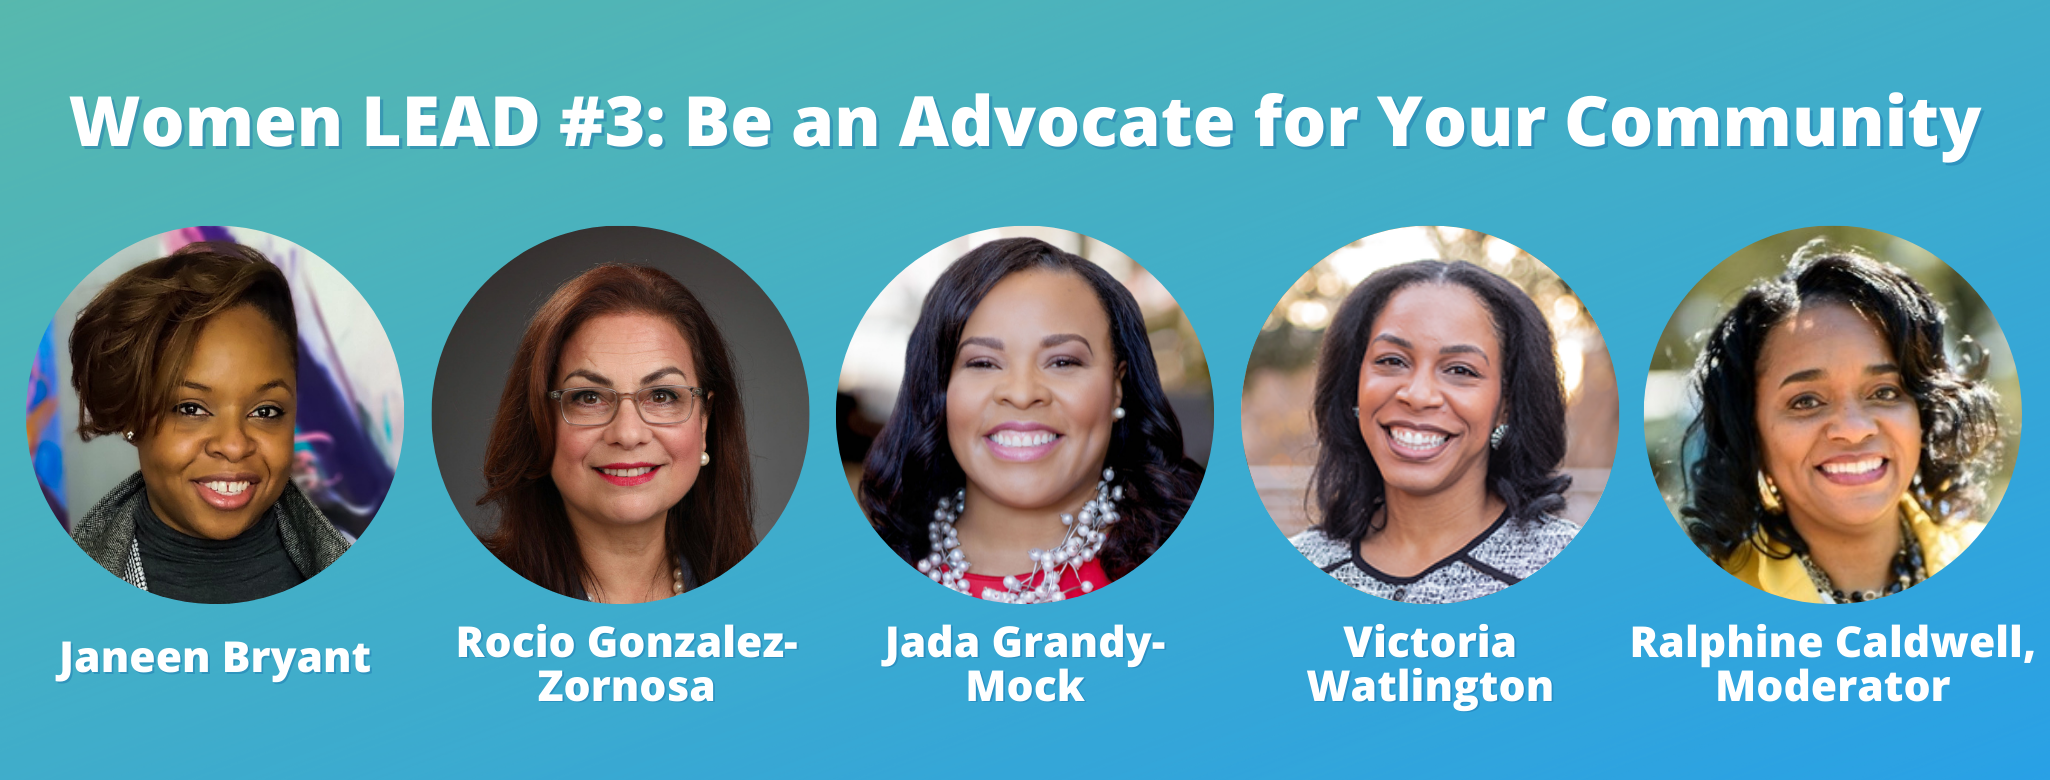 Tell the Truth, Connect on a Human Level, and Seek to Influence Others; Recap of Women LEAD #3: Advocate for Your Community